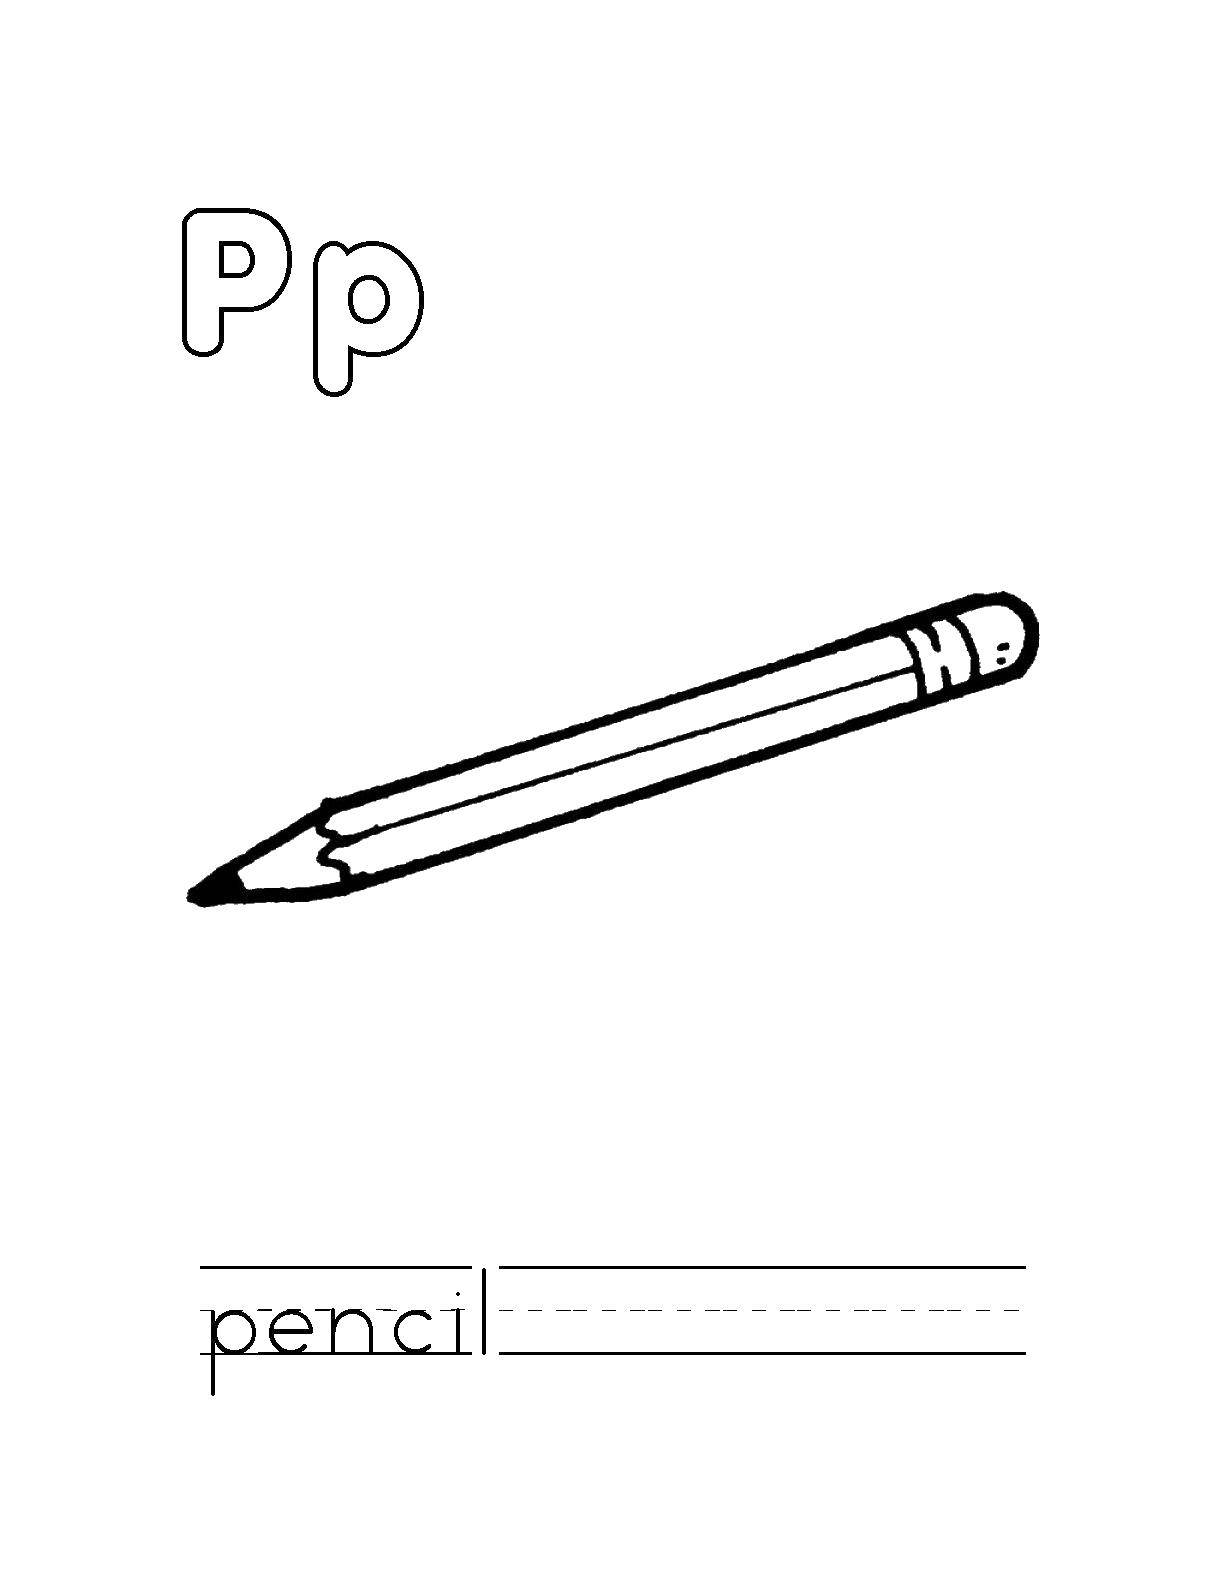 Coloring Letter PI pencil. Category English worksheets. Tags:  recipe.